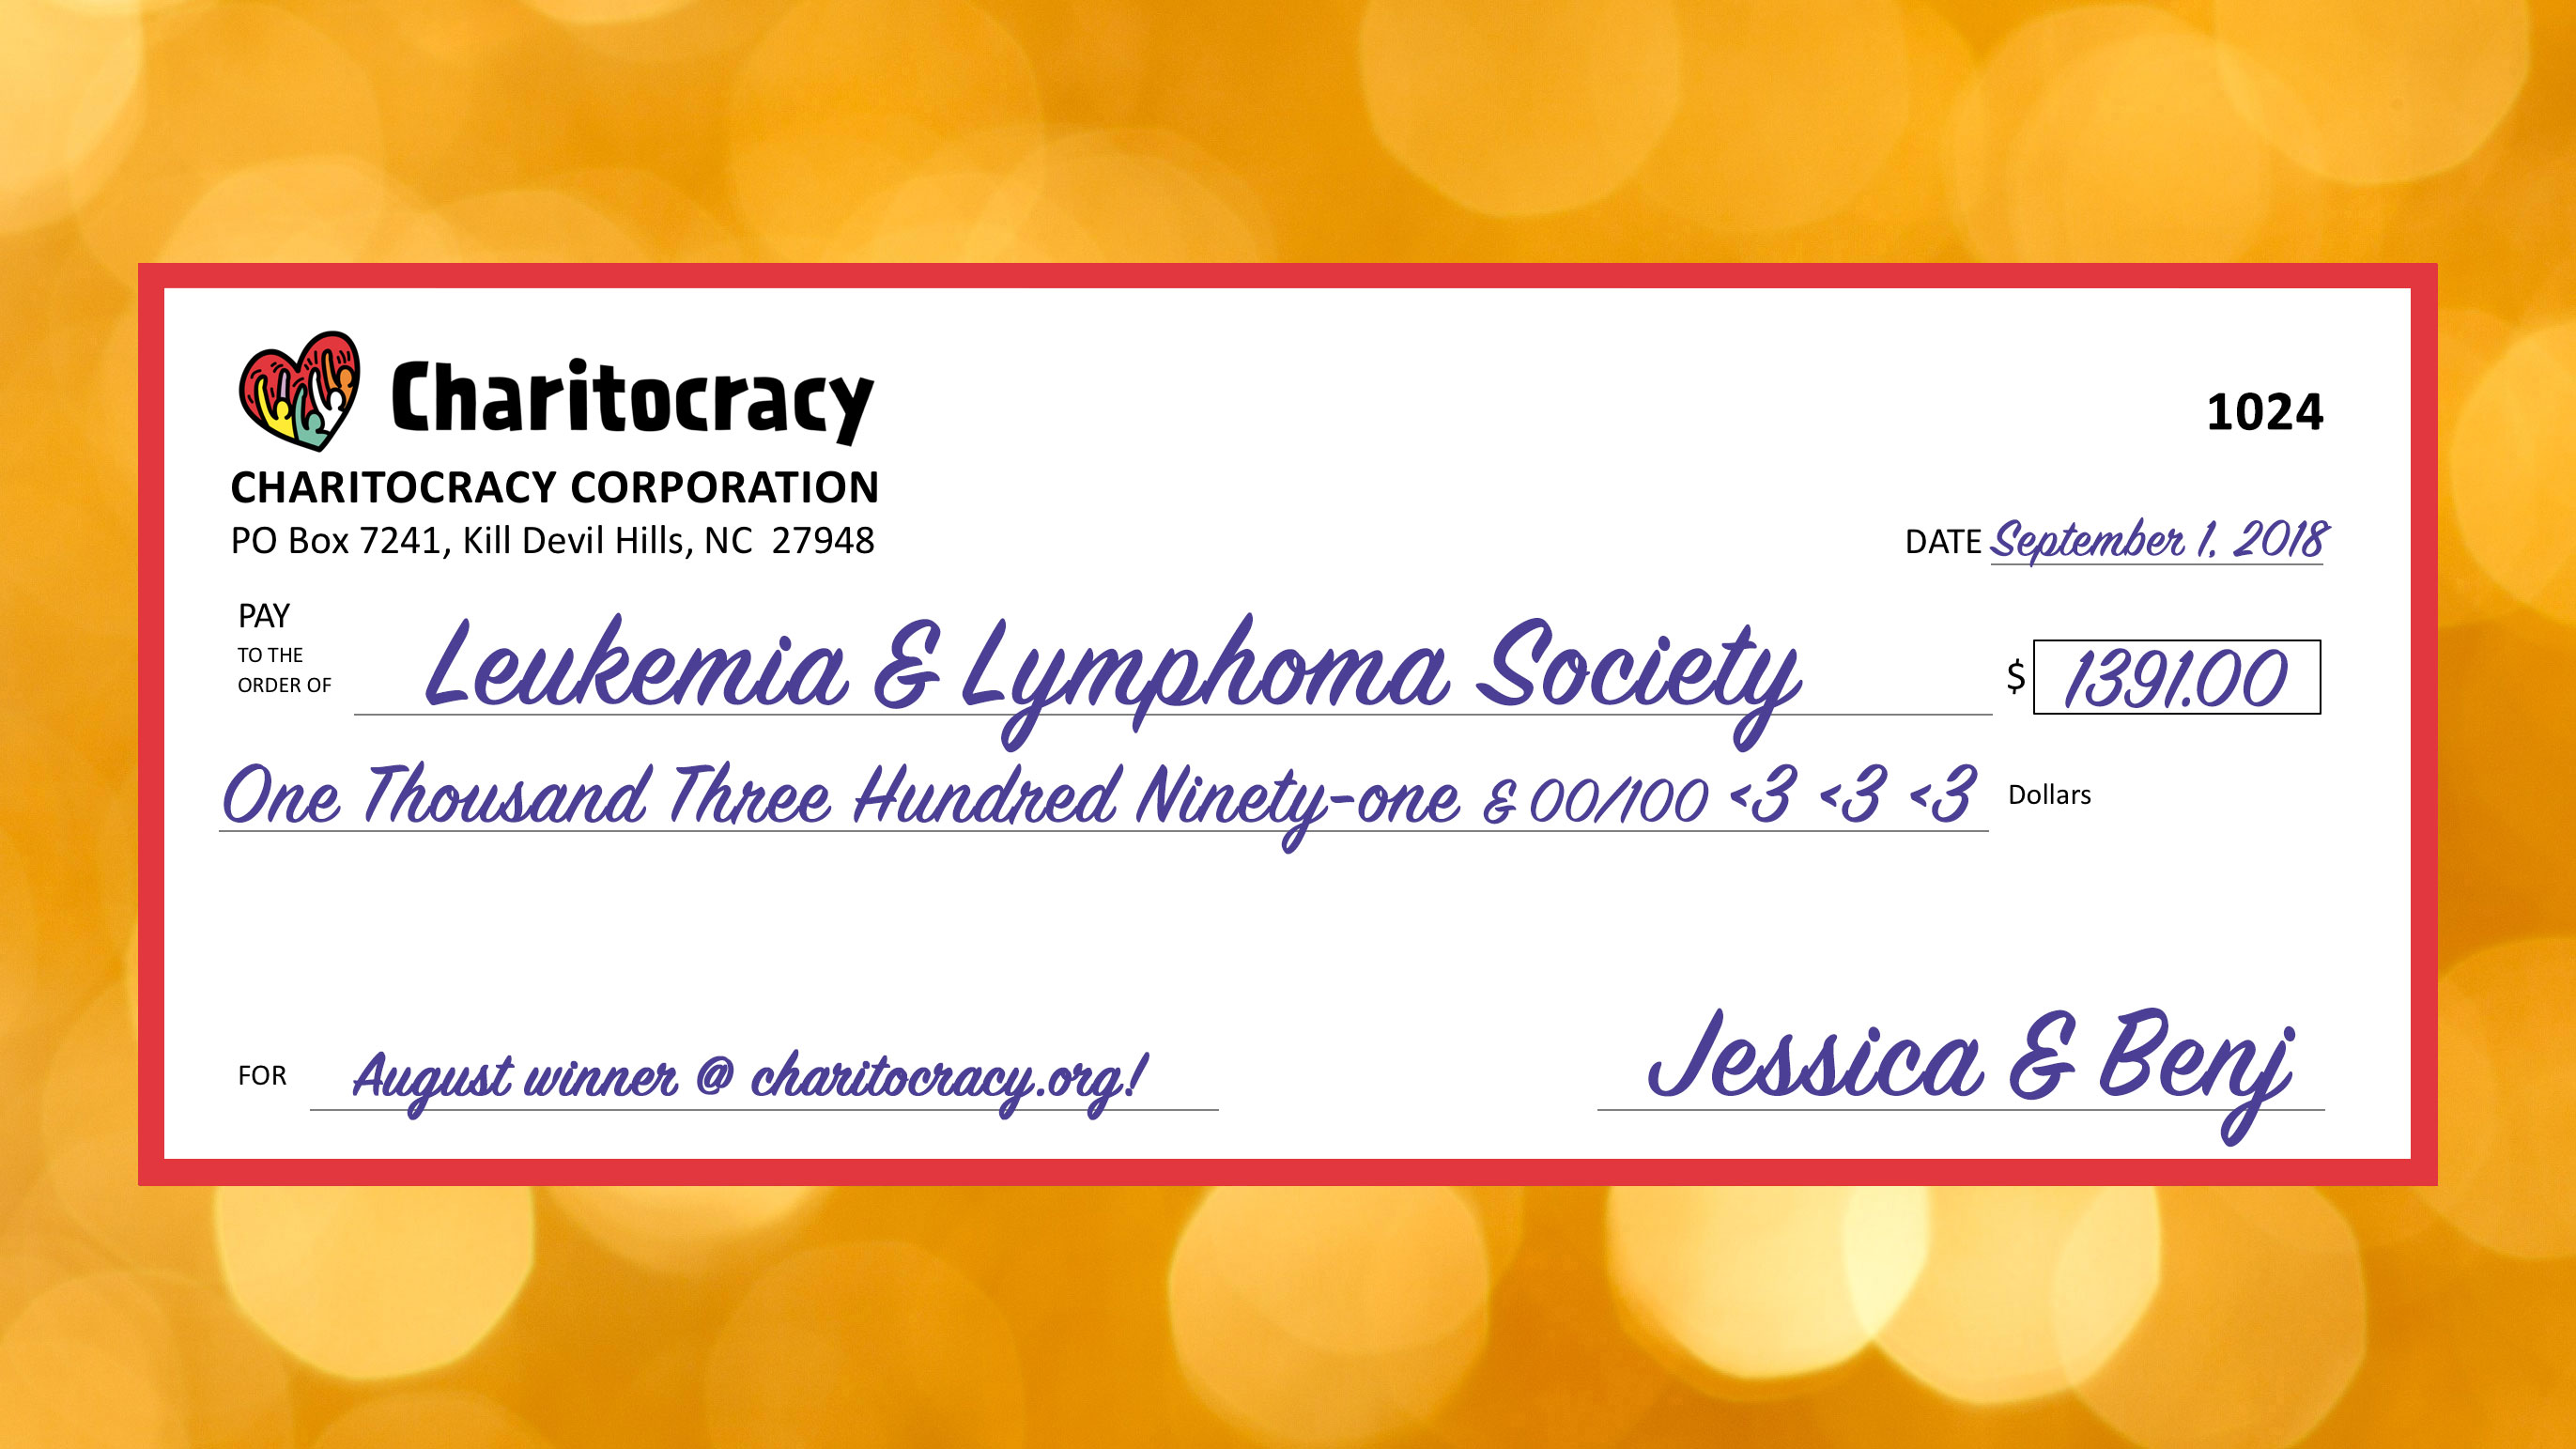 Charitocracy's 24th check to August winner Leukemia & Lymphoma Society for $1391